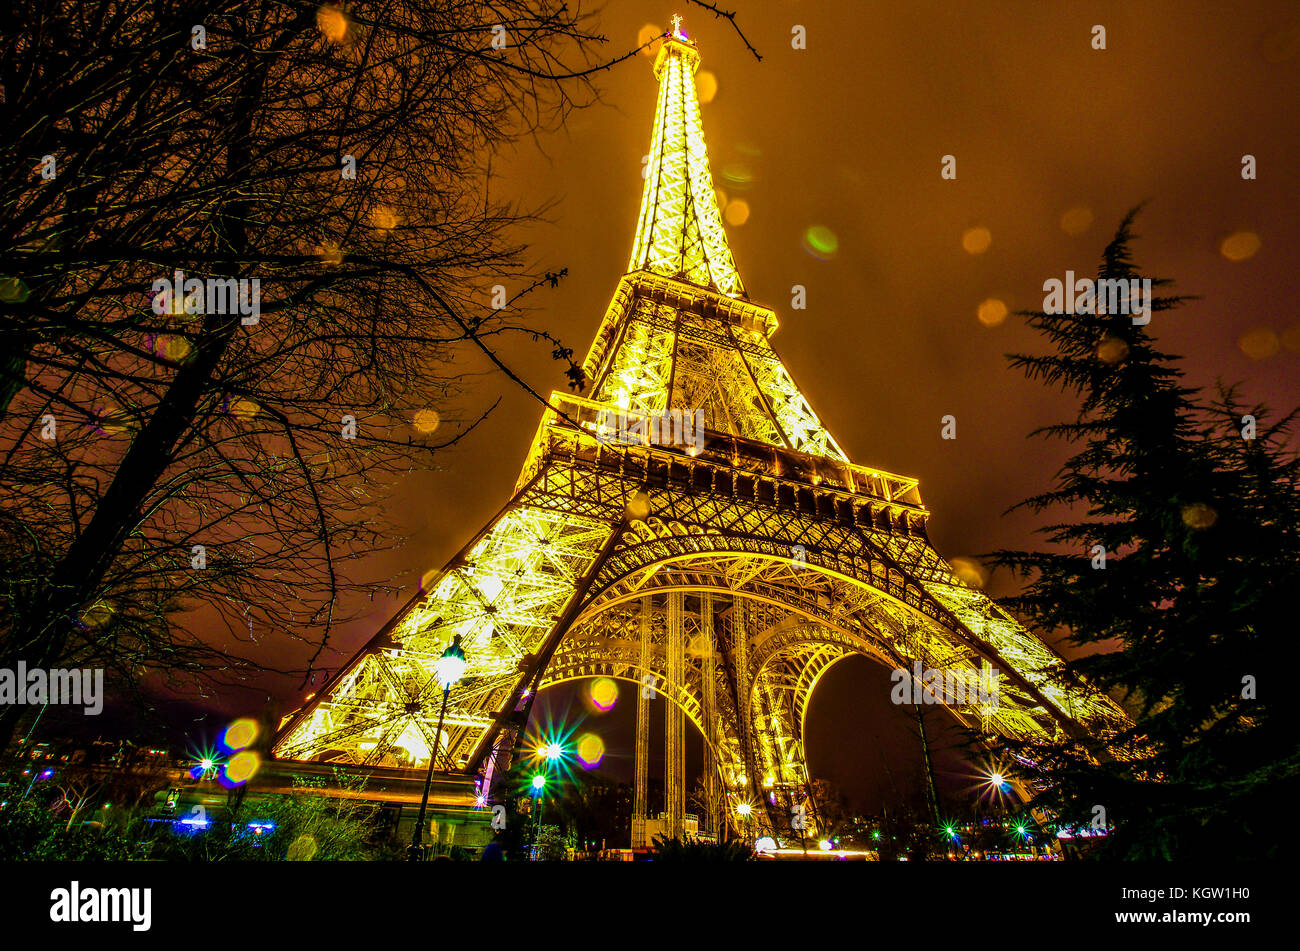 Eiffel Tower at night Banque D'Images